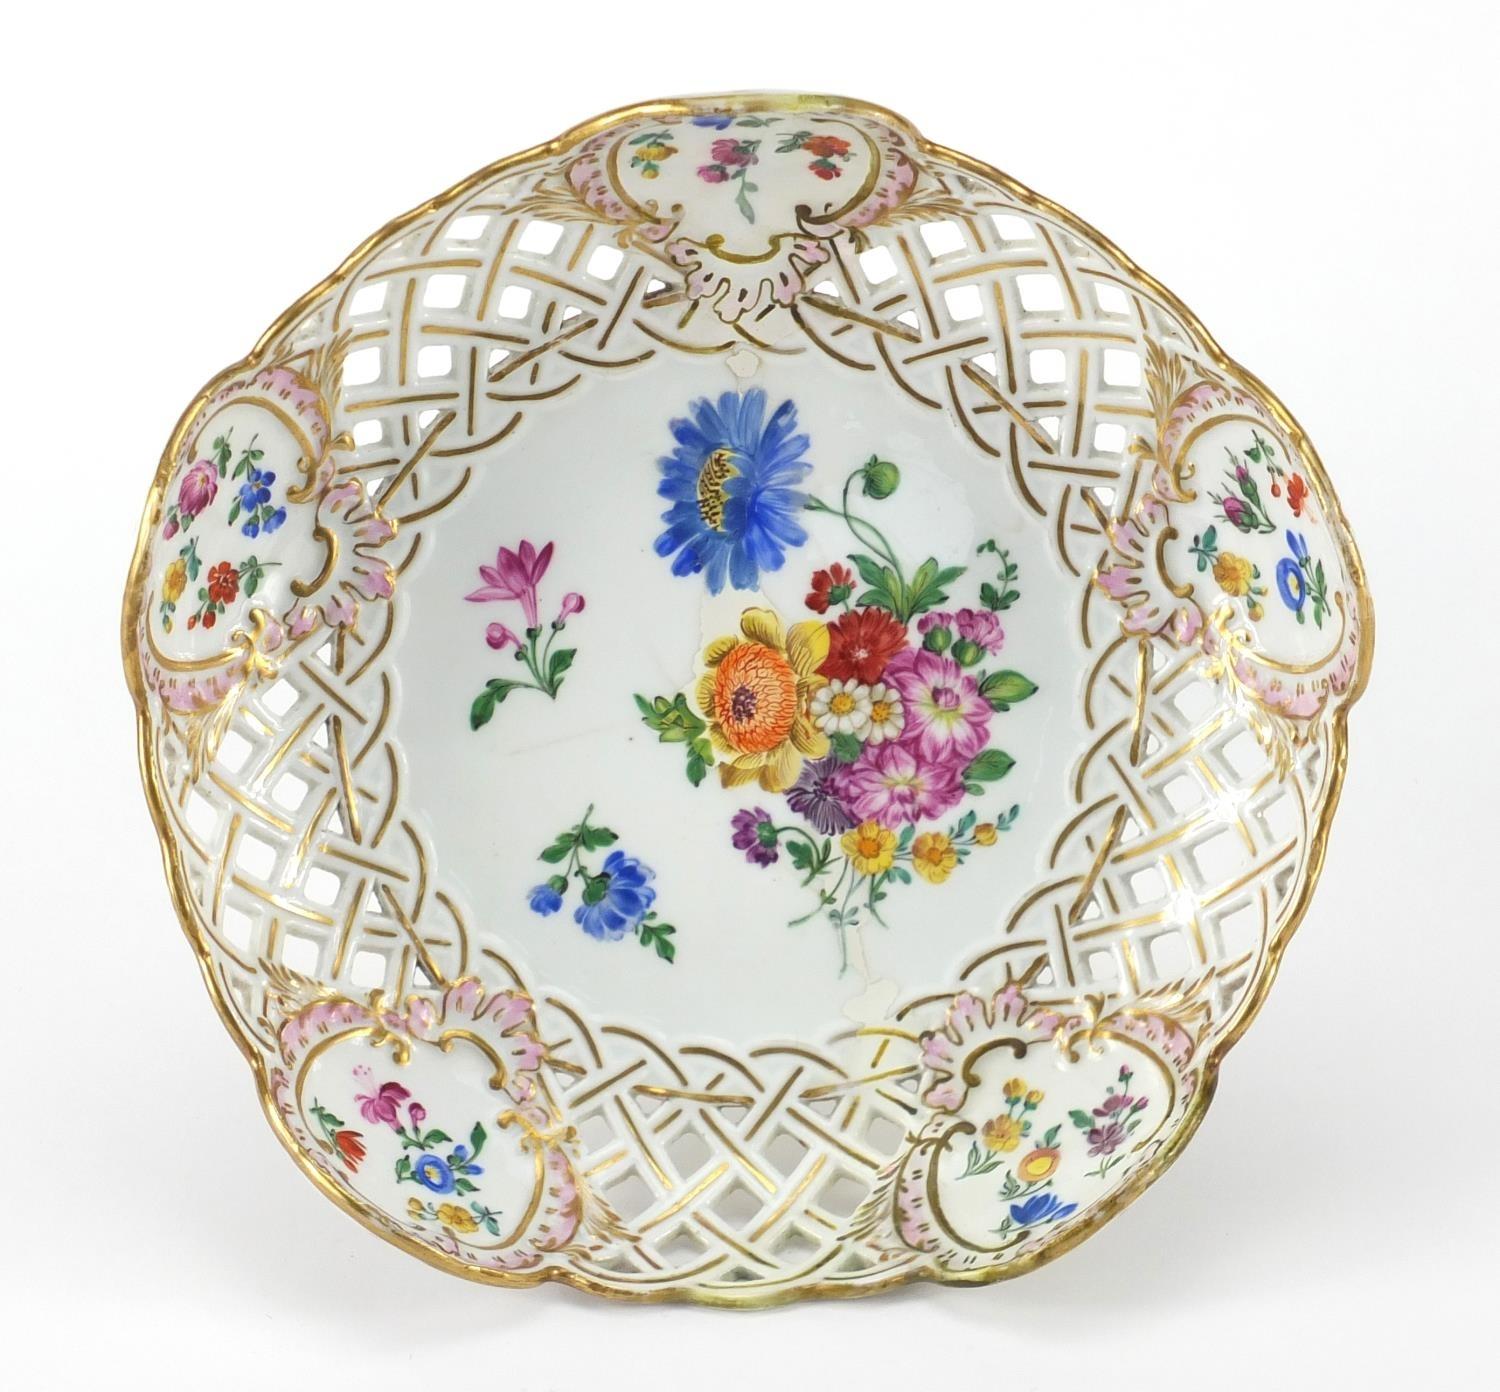 19th century Meissen porcelain tazza having a pierced rim, hand painted with stylised flowers, - Image 3 of 6